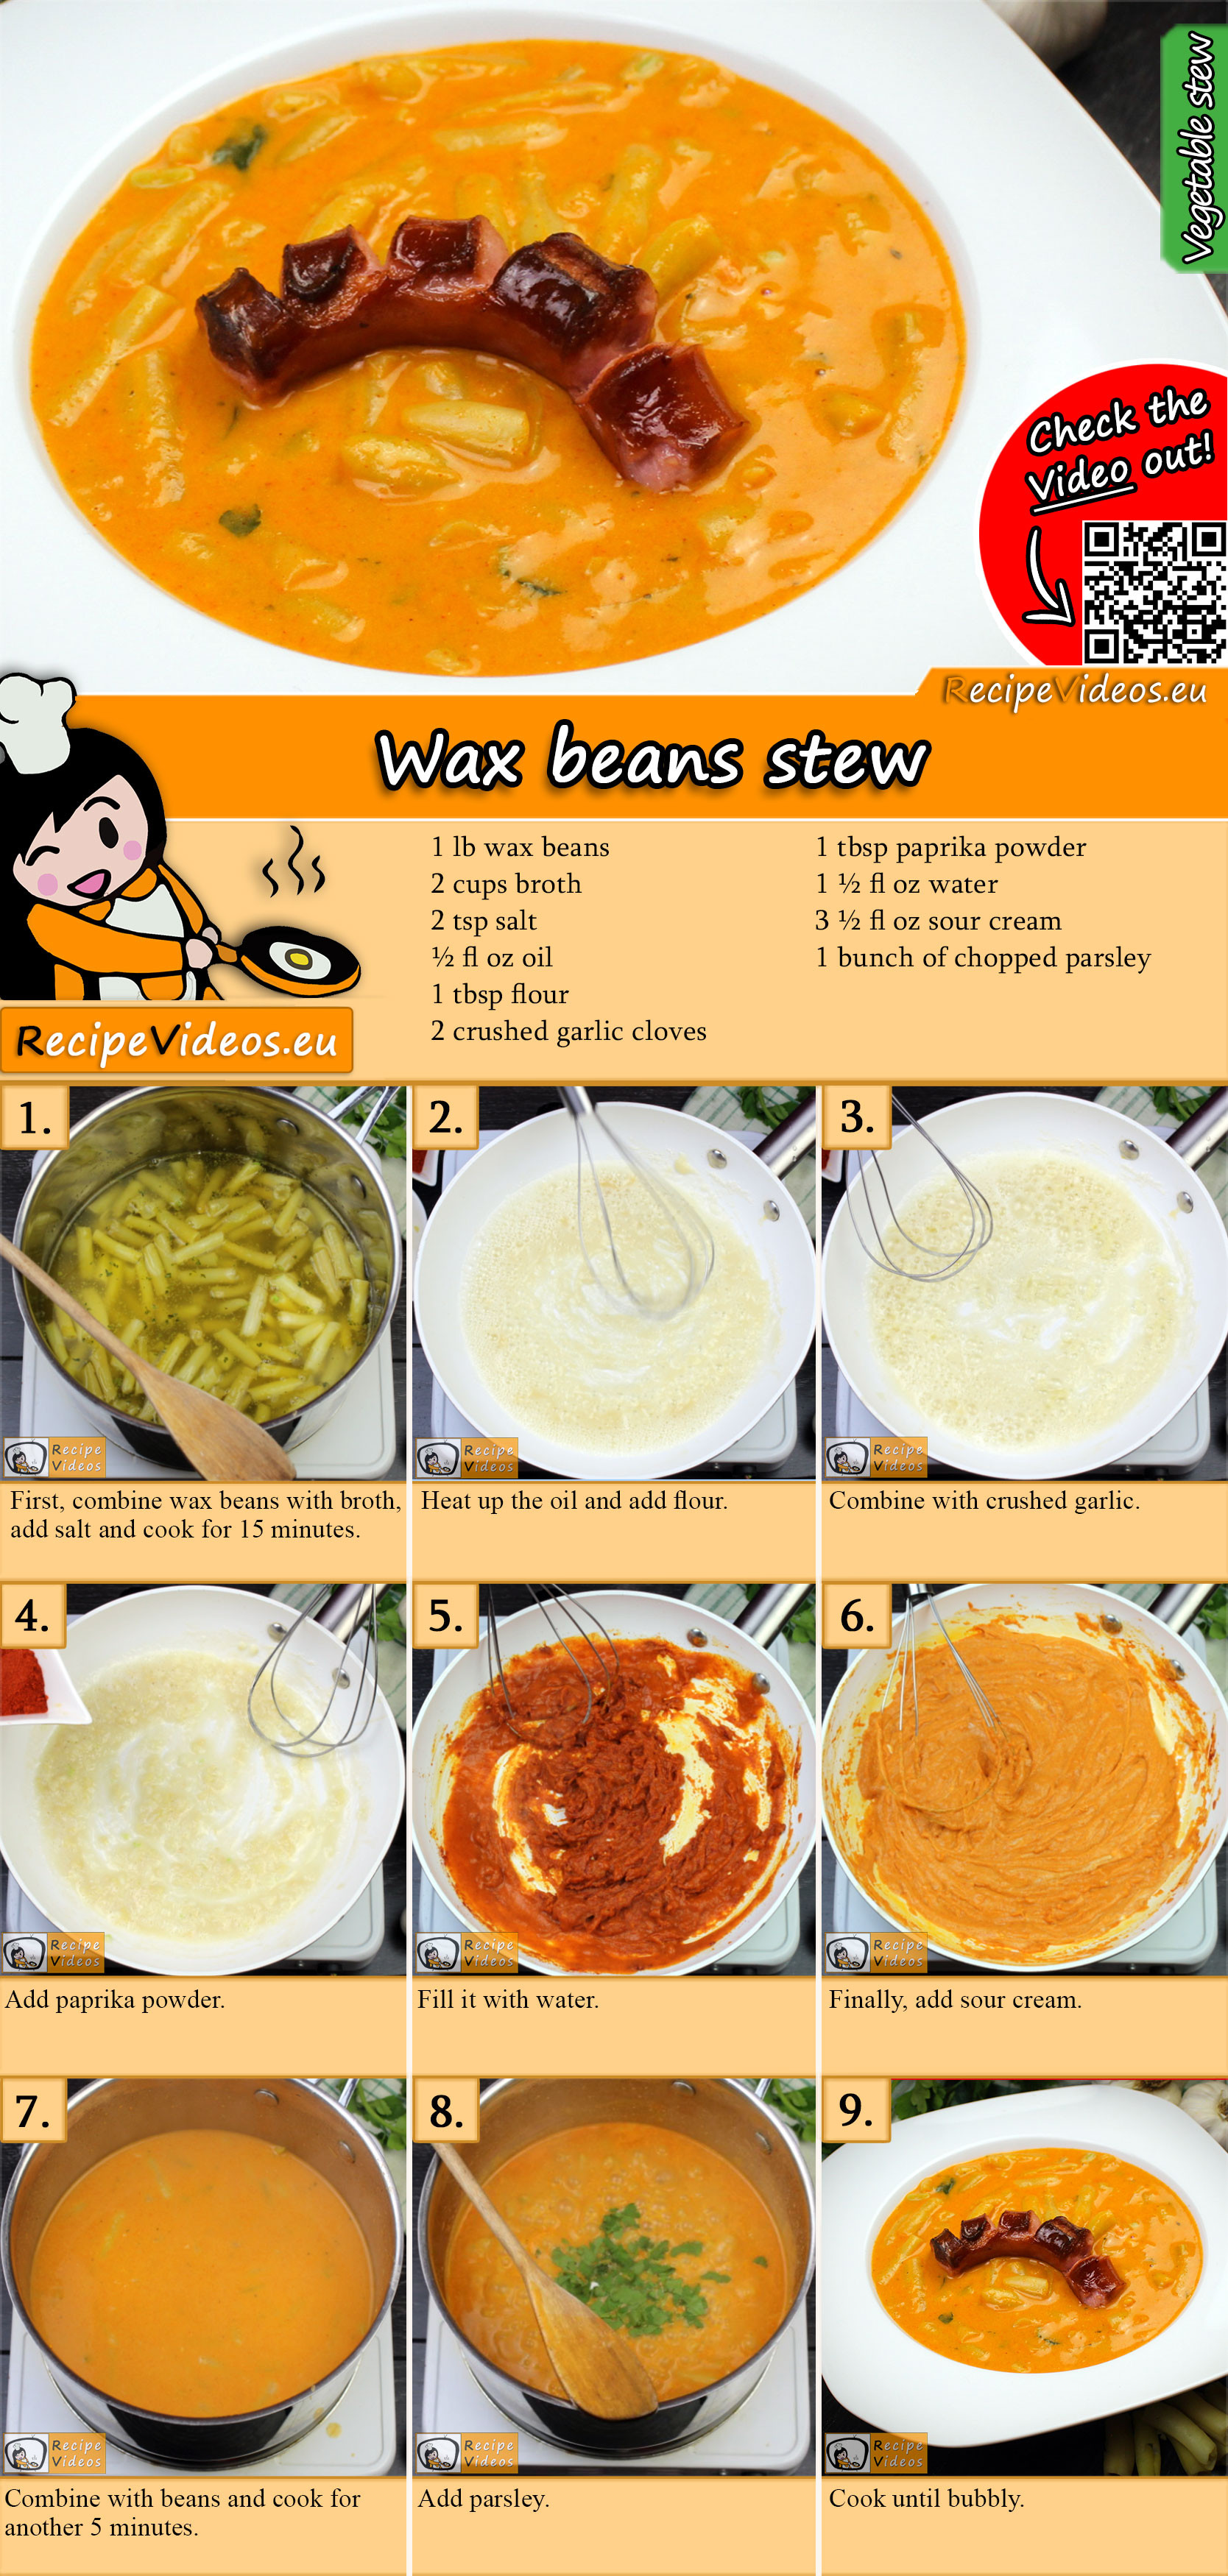 Wax beans stew recipe with video